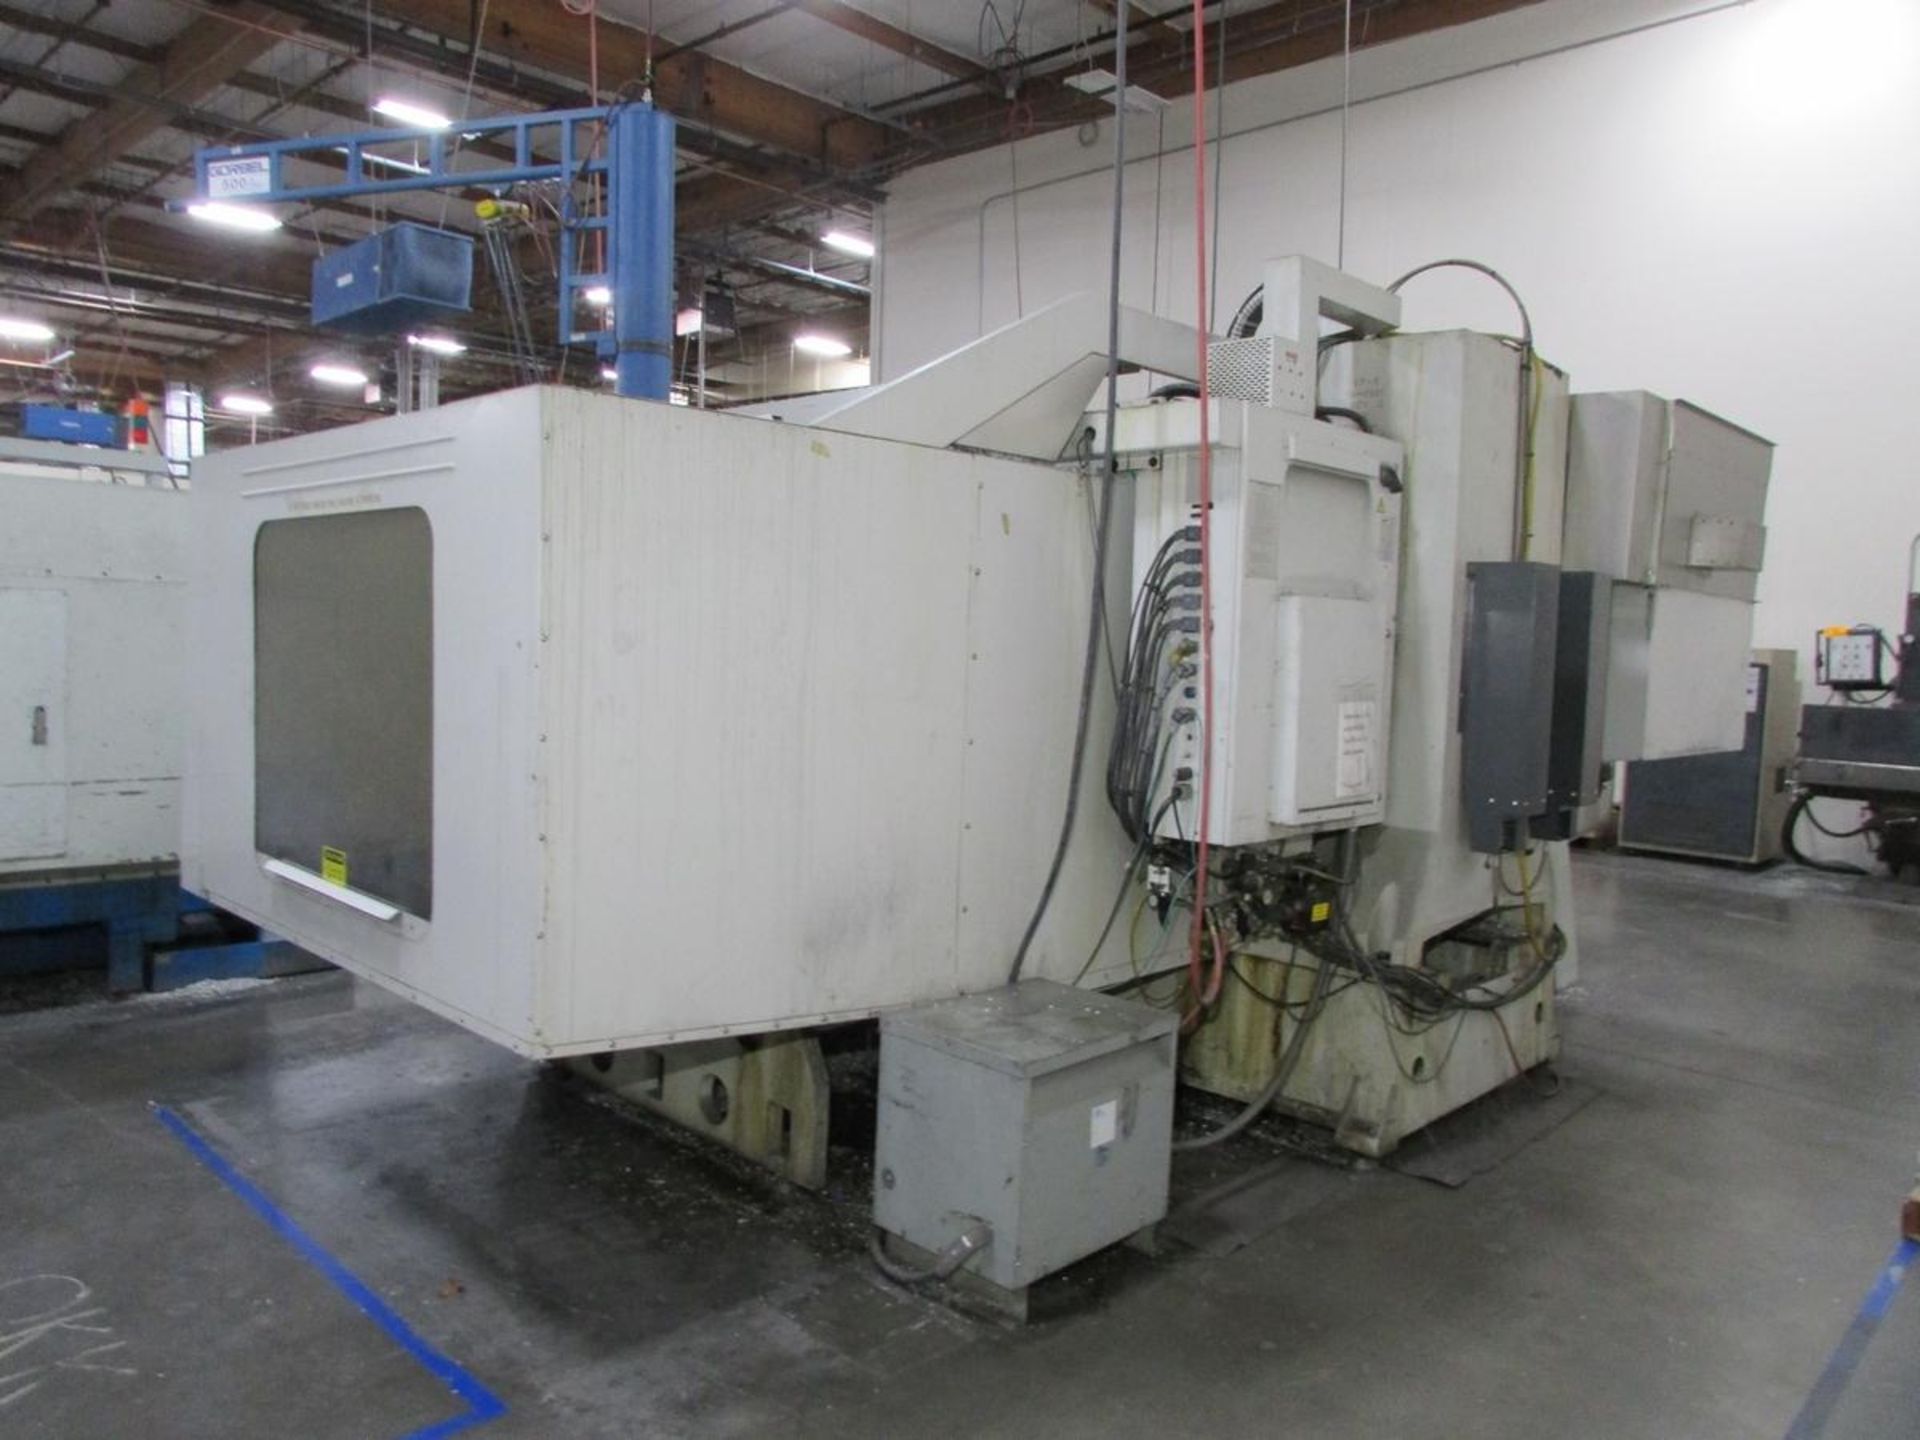 1997 Haas VR-11 5-Axis CNC Vertical Maching Center - Image 19 of 30